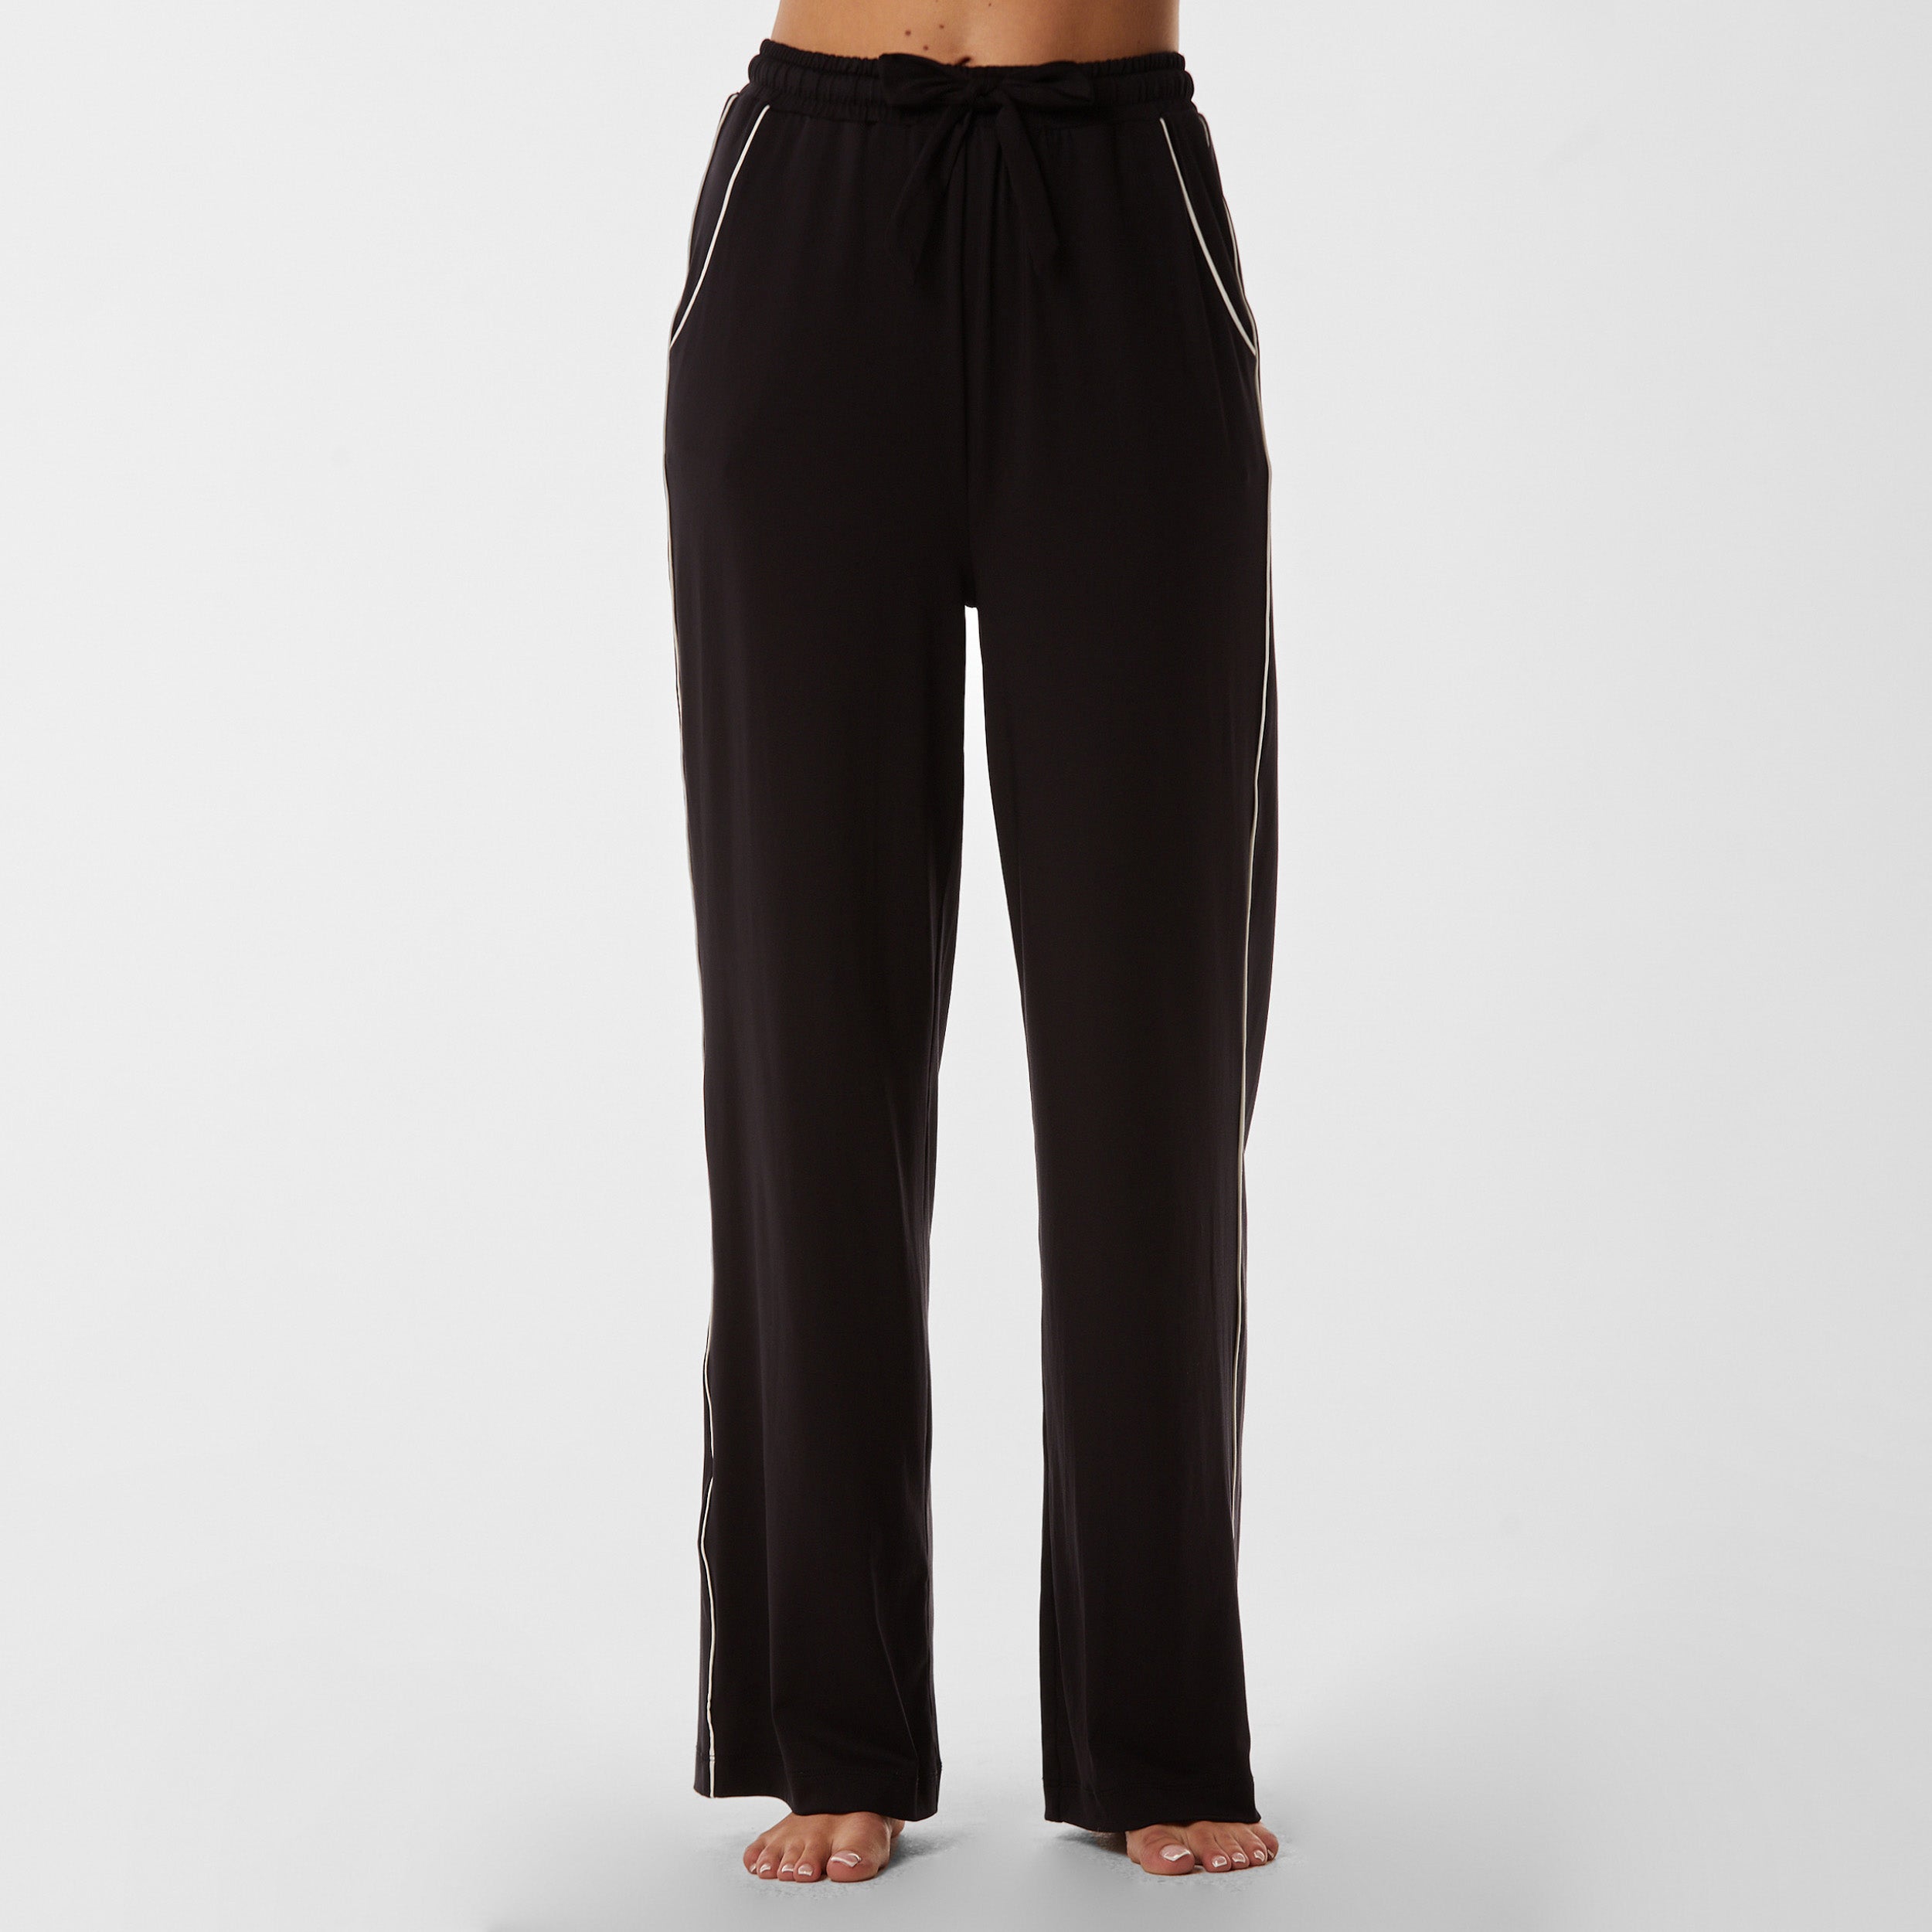 Front view of soft black pajama pant